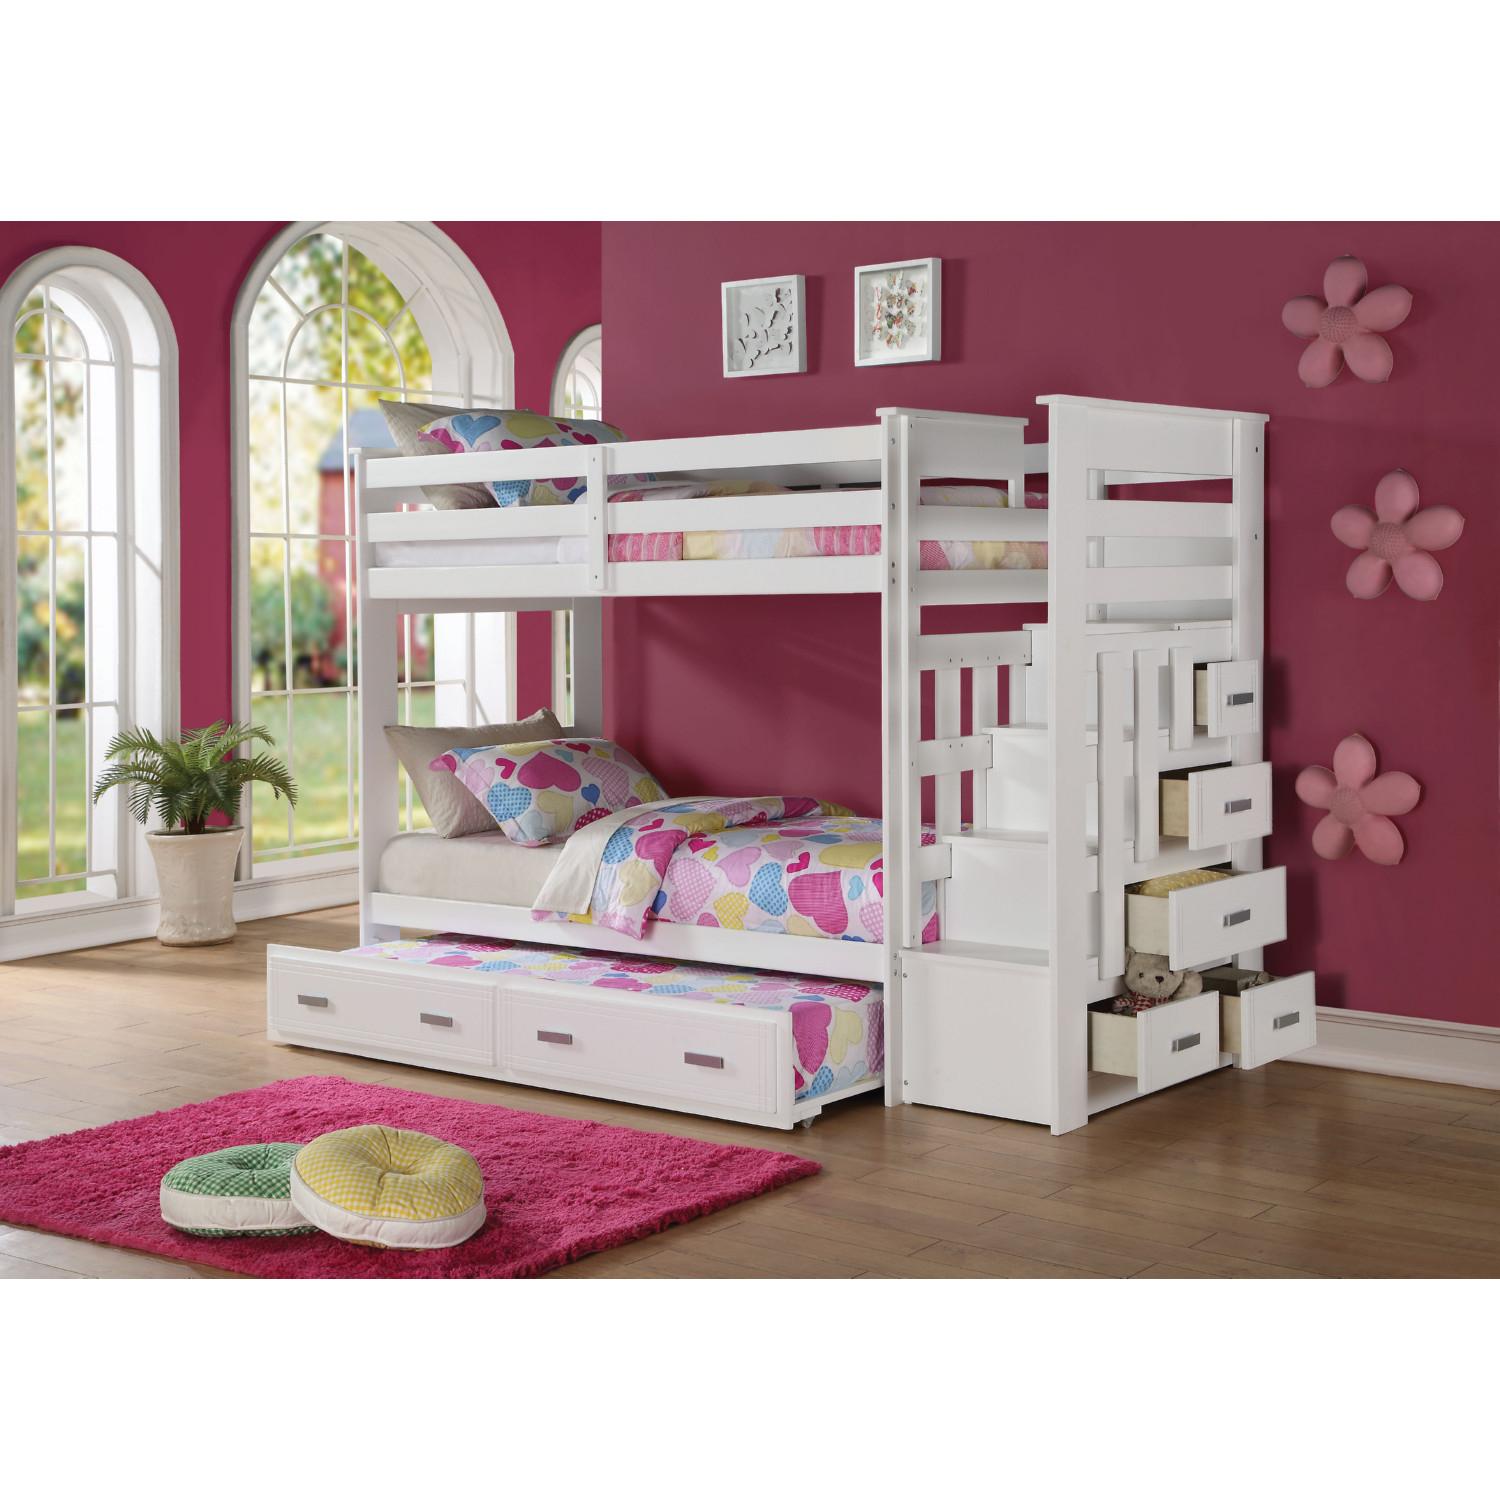 

    
Rustic White Wood Twin/Twin Bunk Bed w/Trundle & Storage Acme Allentown 37370
